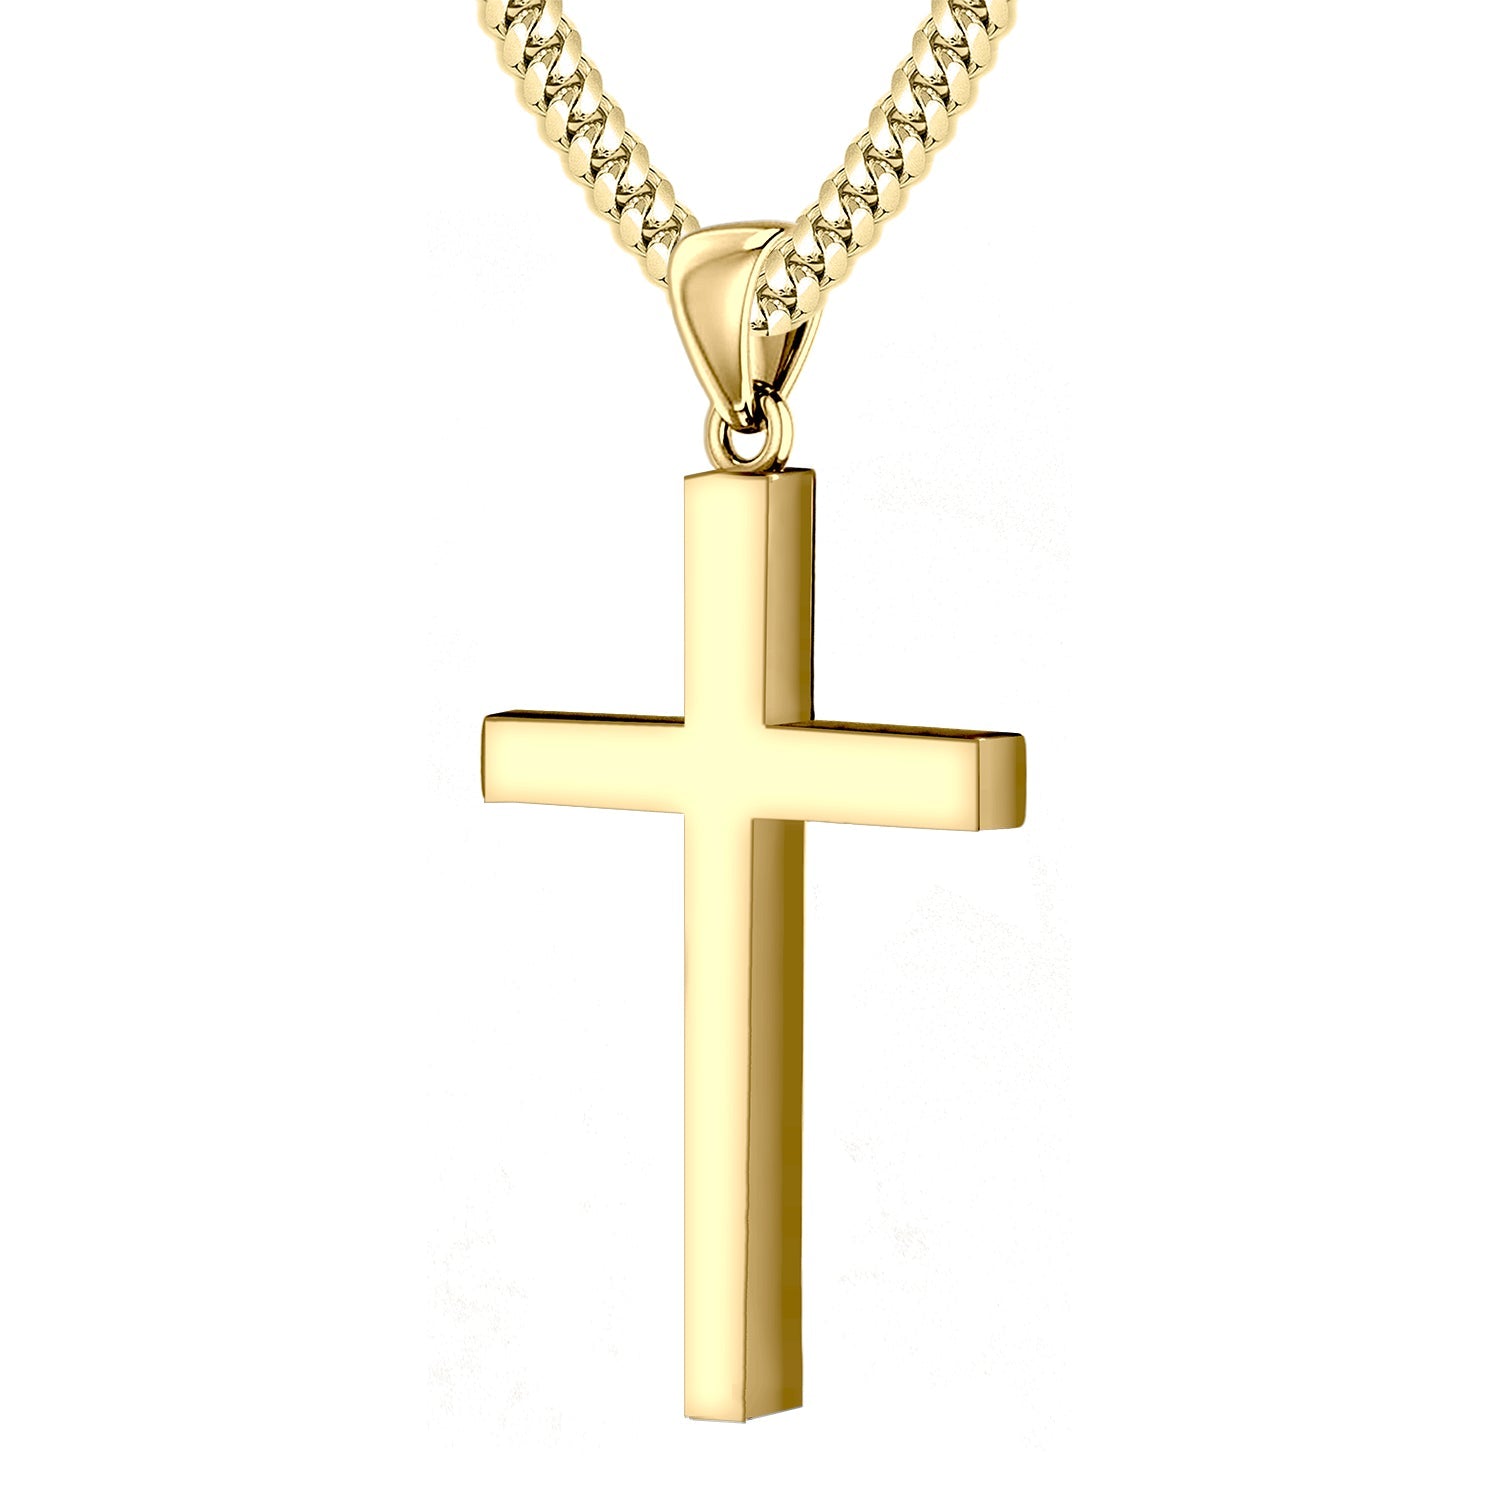 Men's XL Heavy Solid 2in 10K or 14K Yellow Gold Christian Cross Pendant Necklace, 50mm - US Jewels